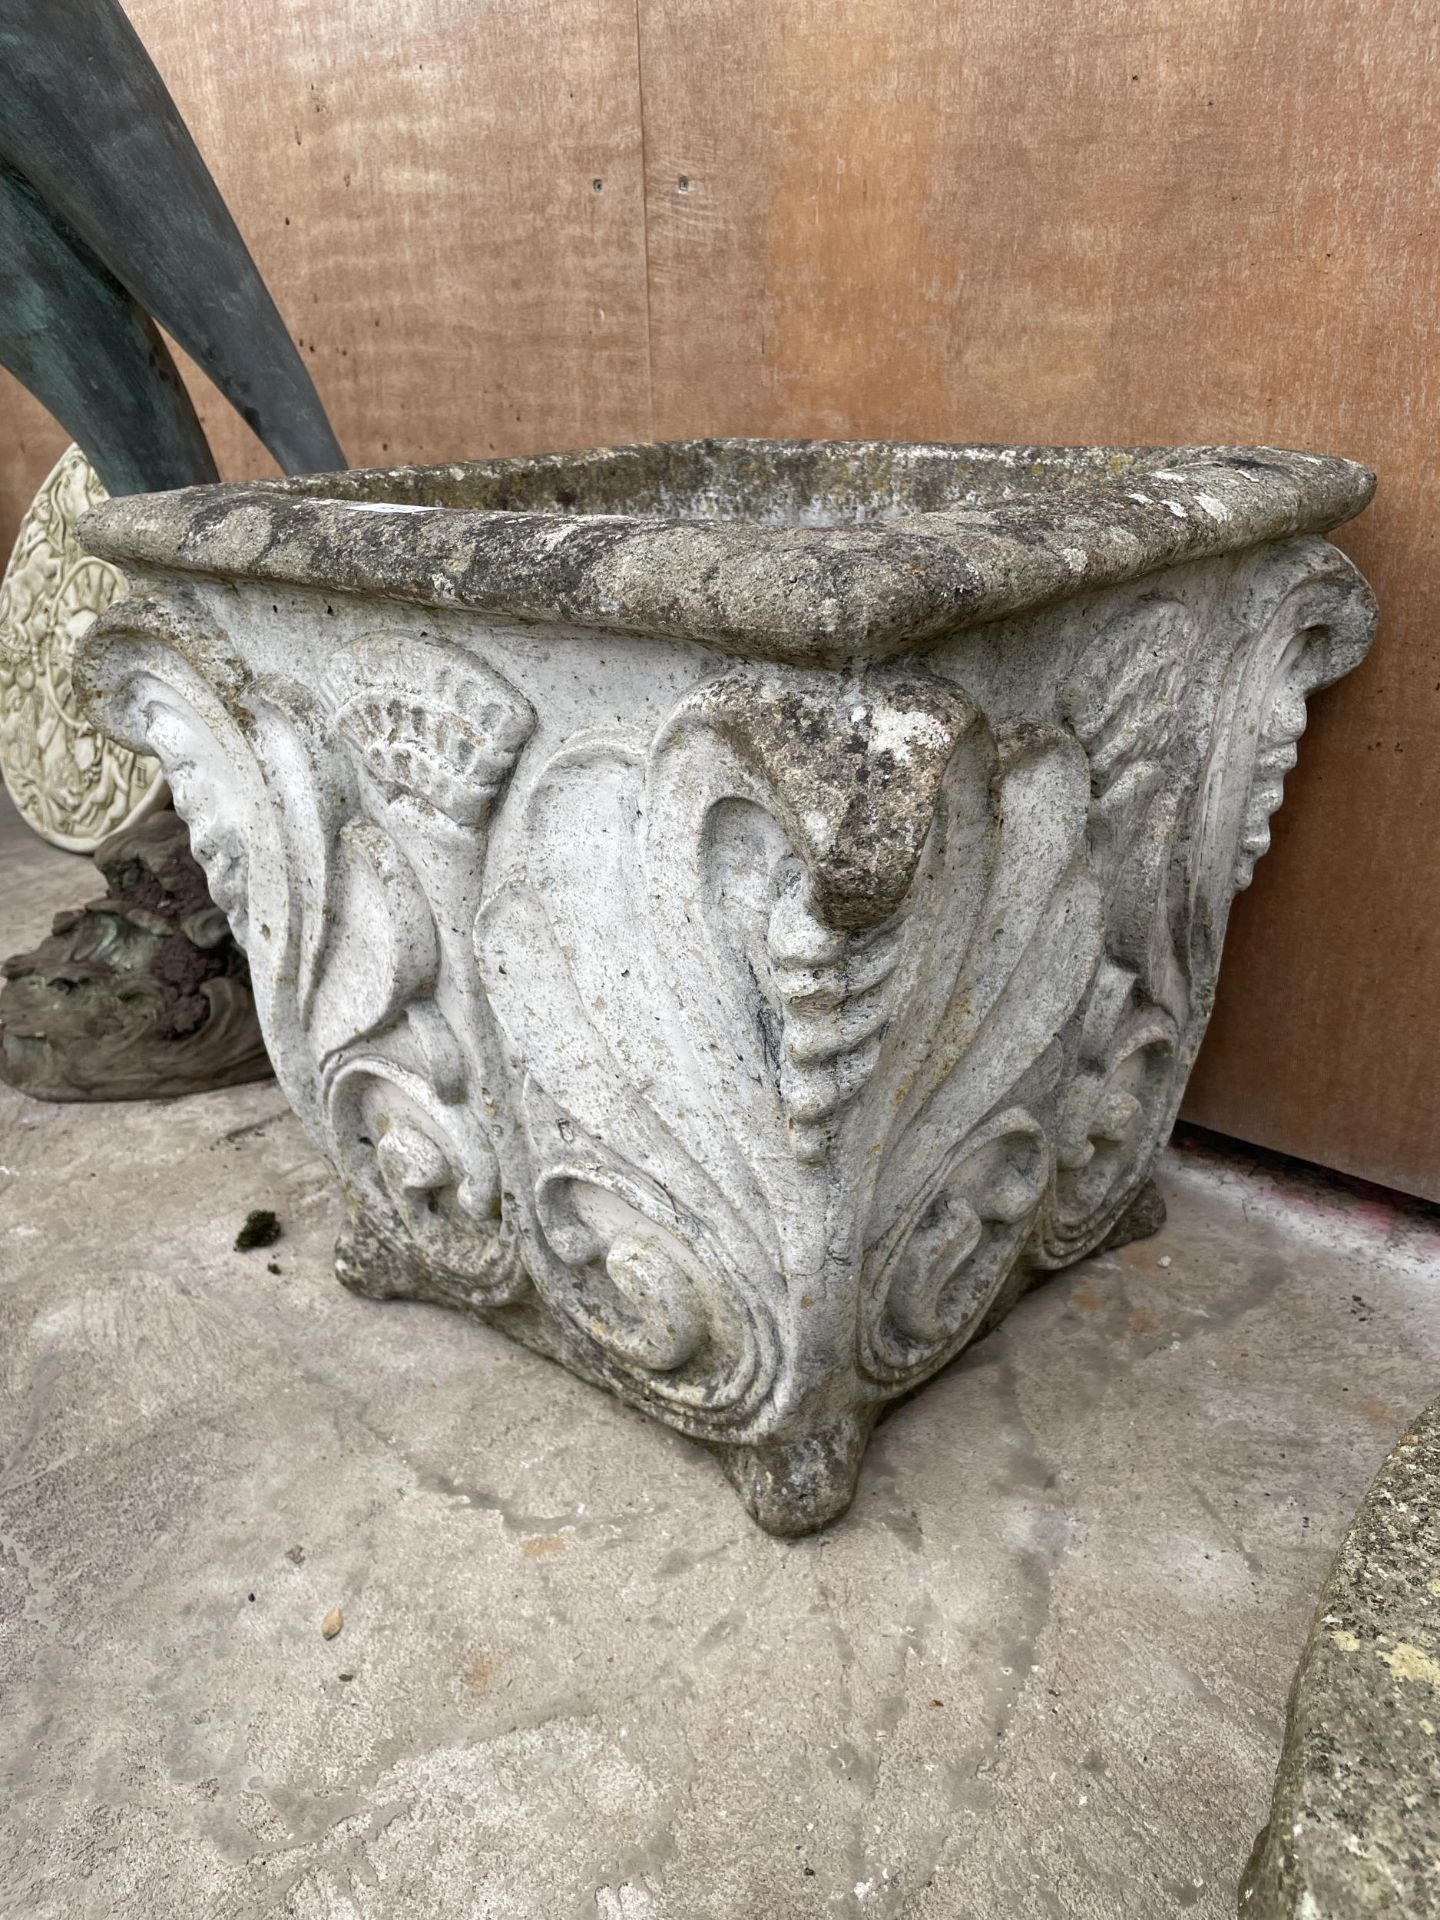 A LARGE RECONSTITUTED STONE GARDEN PLANTER (49CM x 49CM x 46CM) - Image 2 of 4